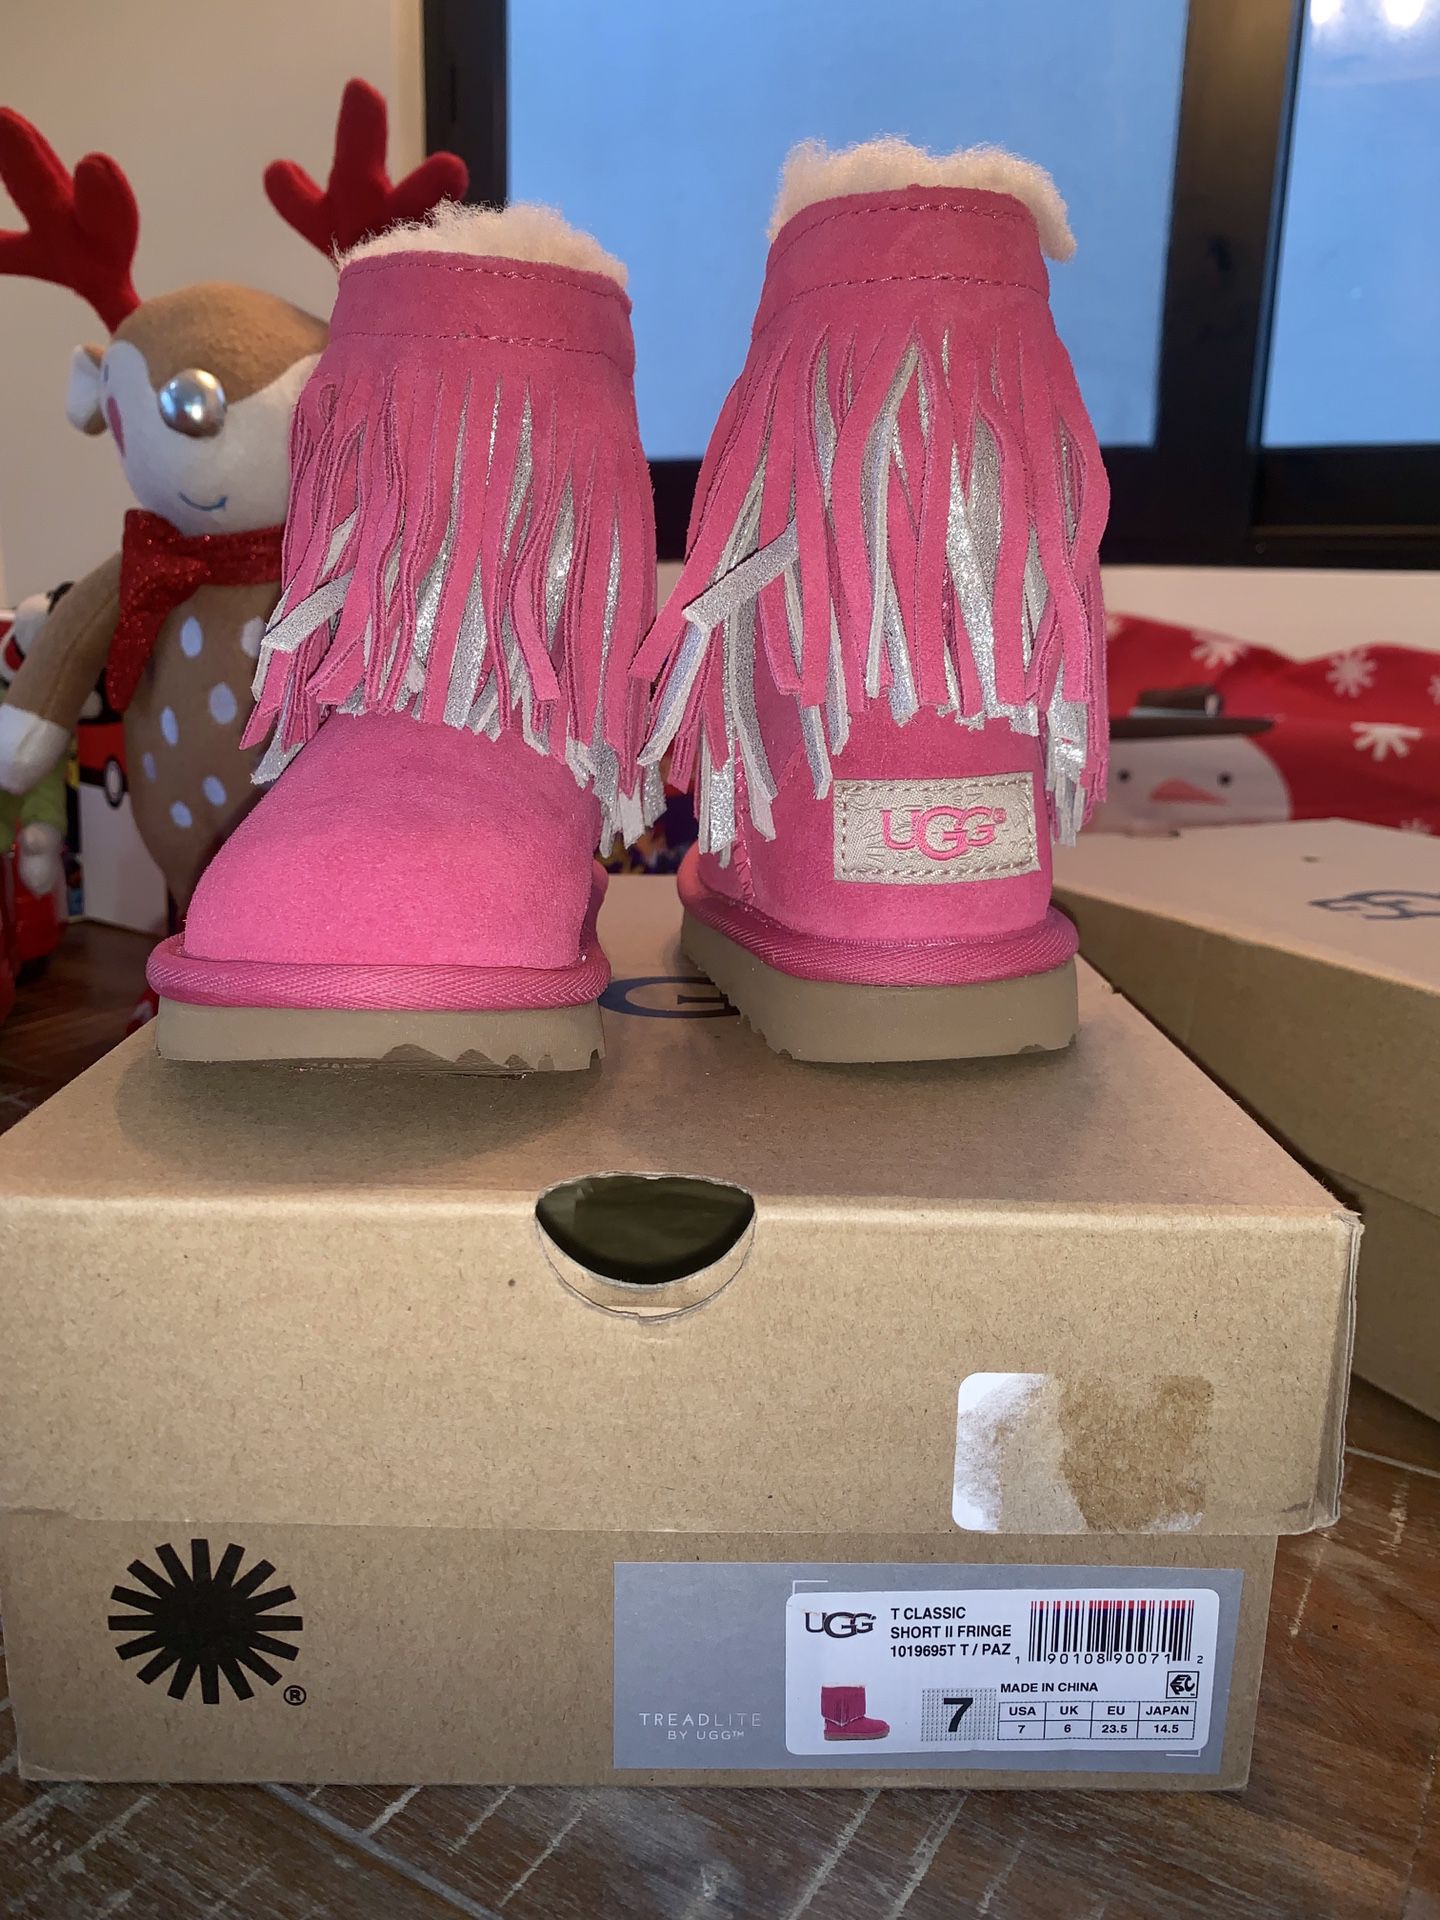 NEW UGG boots size 7 toddler girl